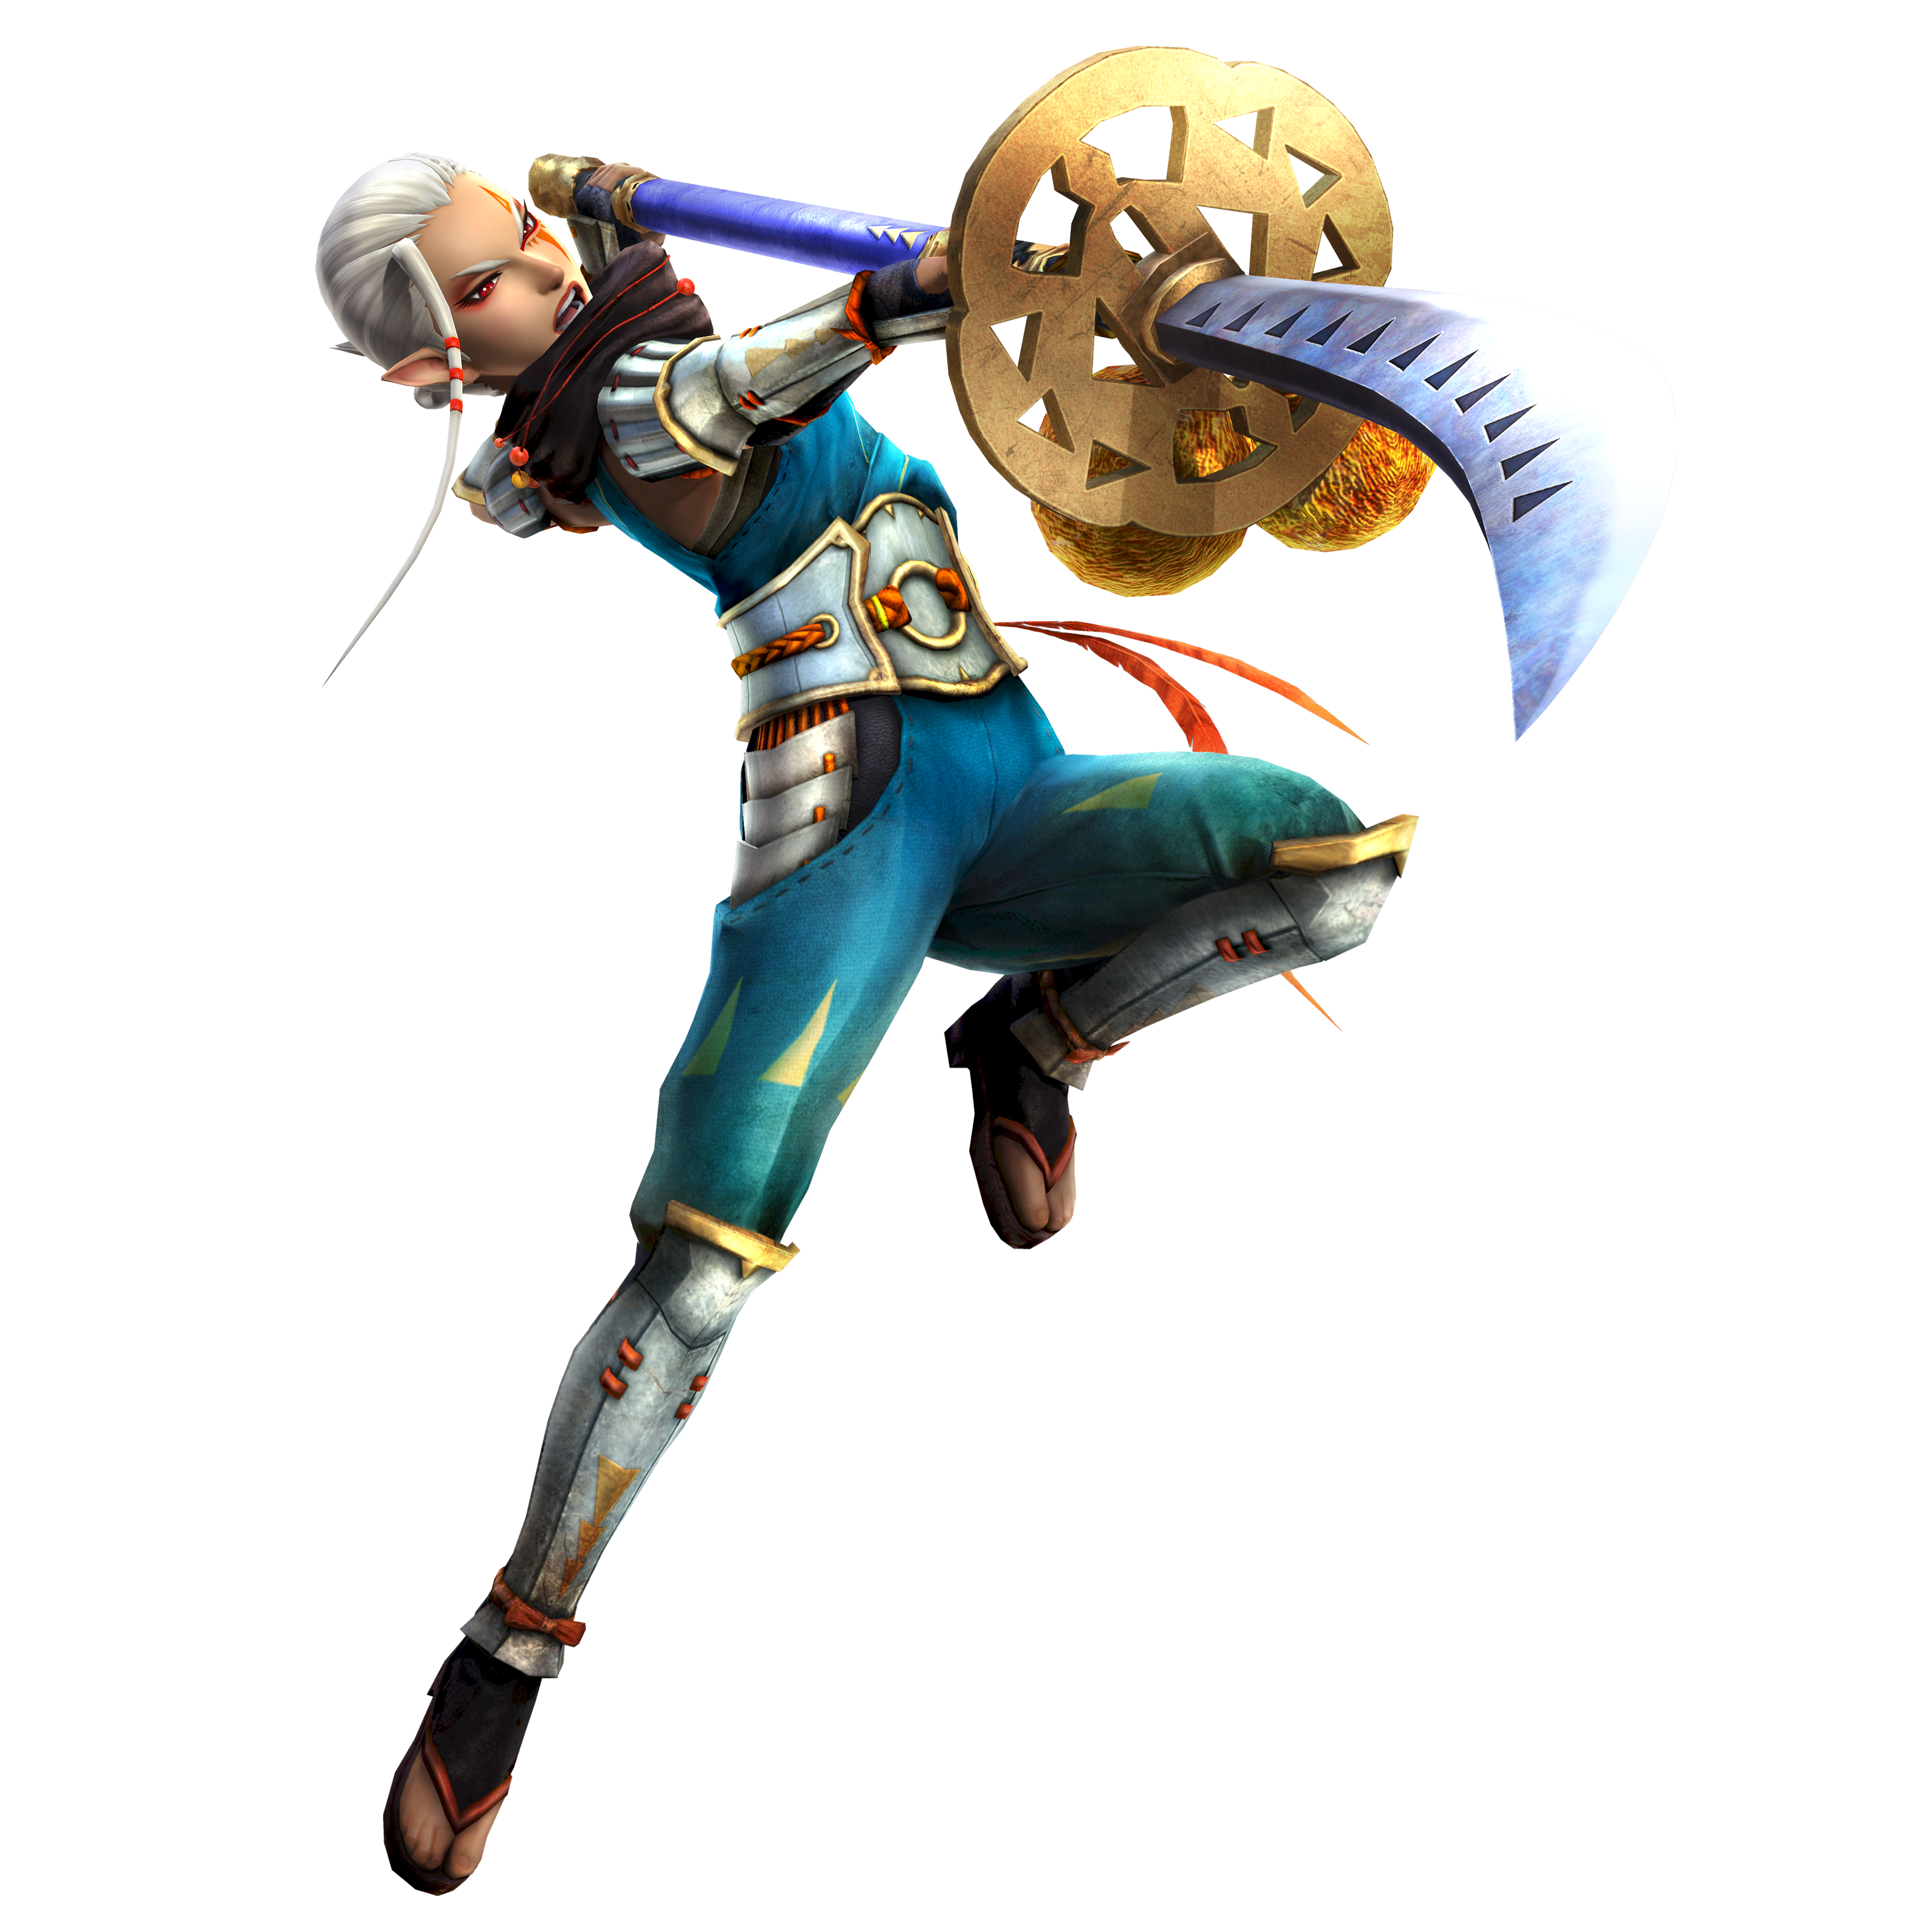 Impa with Spear